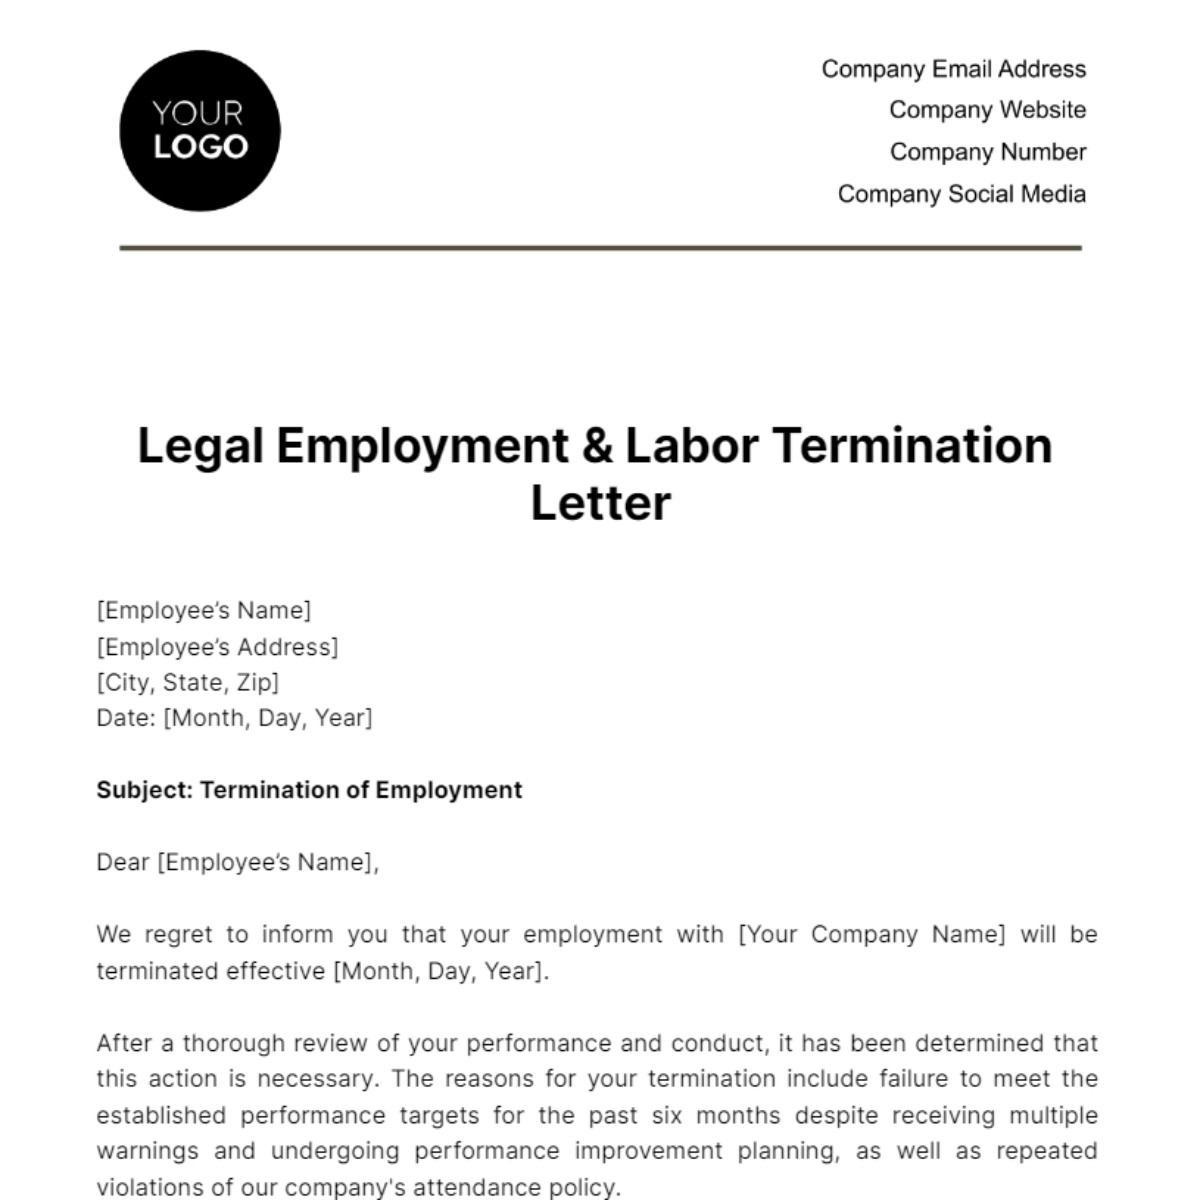 Free Legal Employment & Labor Termination Letter Template